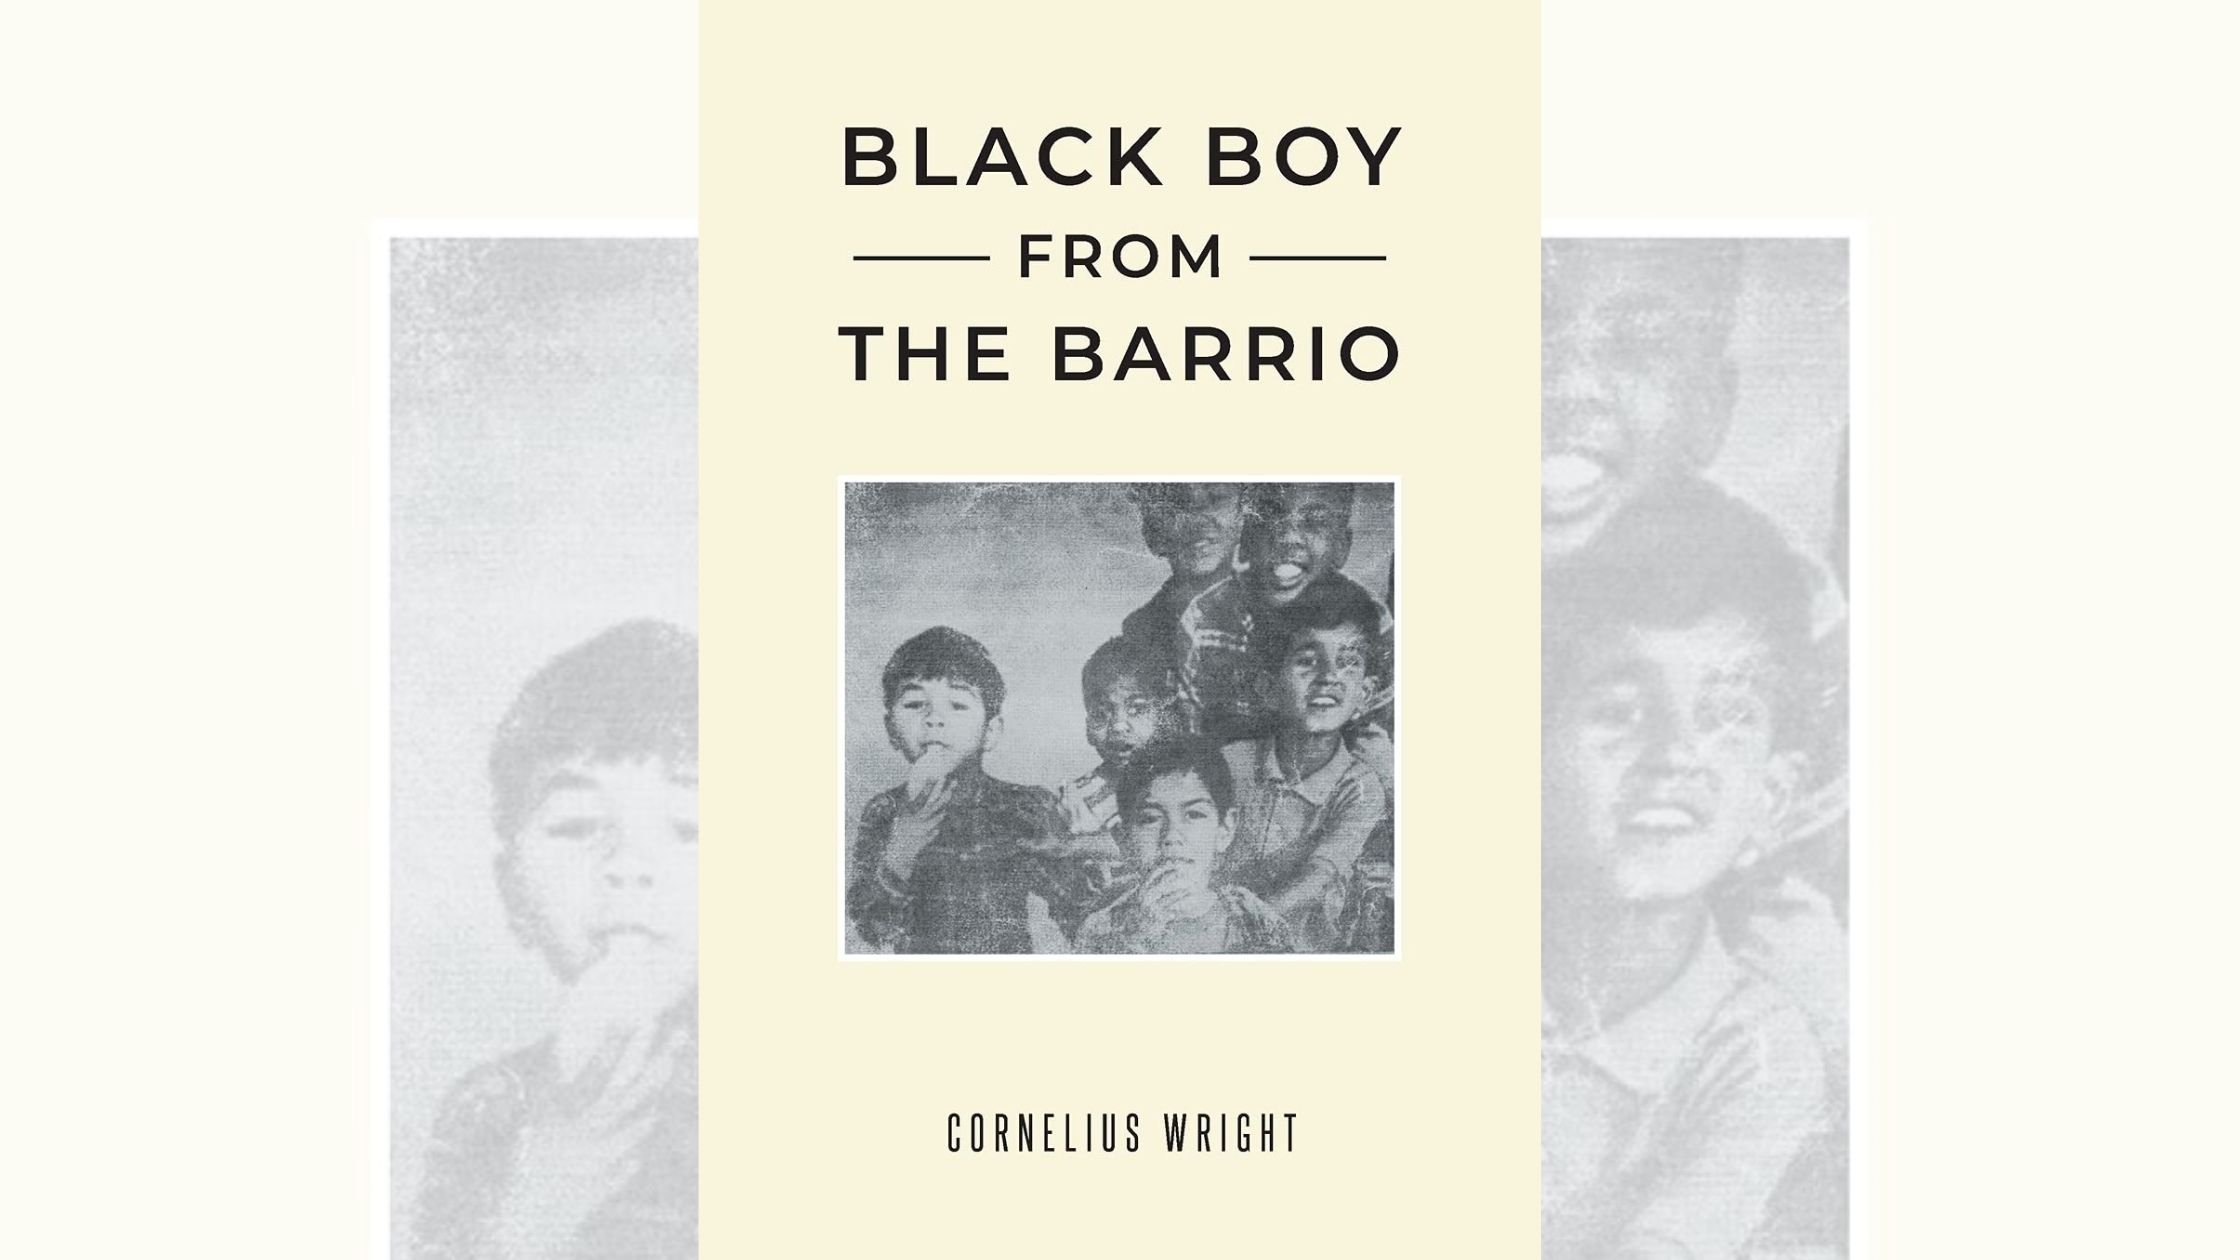 Author Cornelius Wright’s new book “Black Boy from the Barrio” is the first in a series of memoirs sharing the challenges and triumphs of his life in Northern California